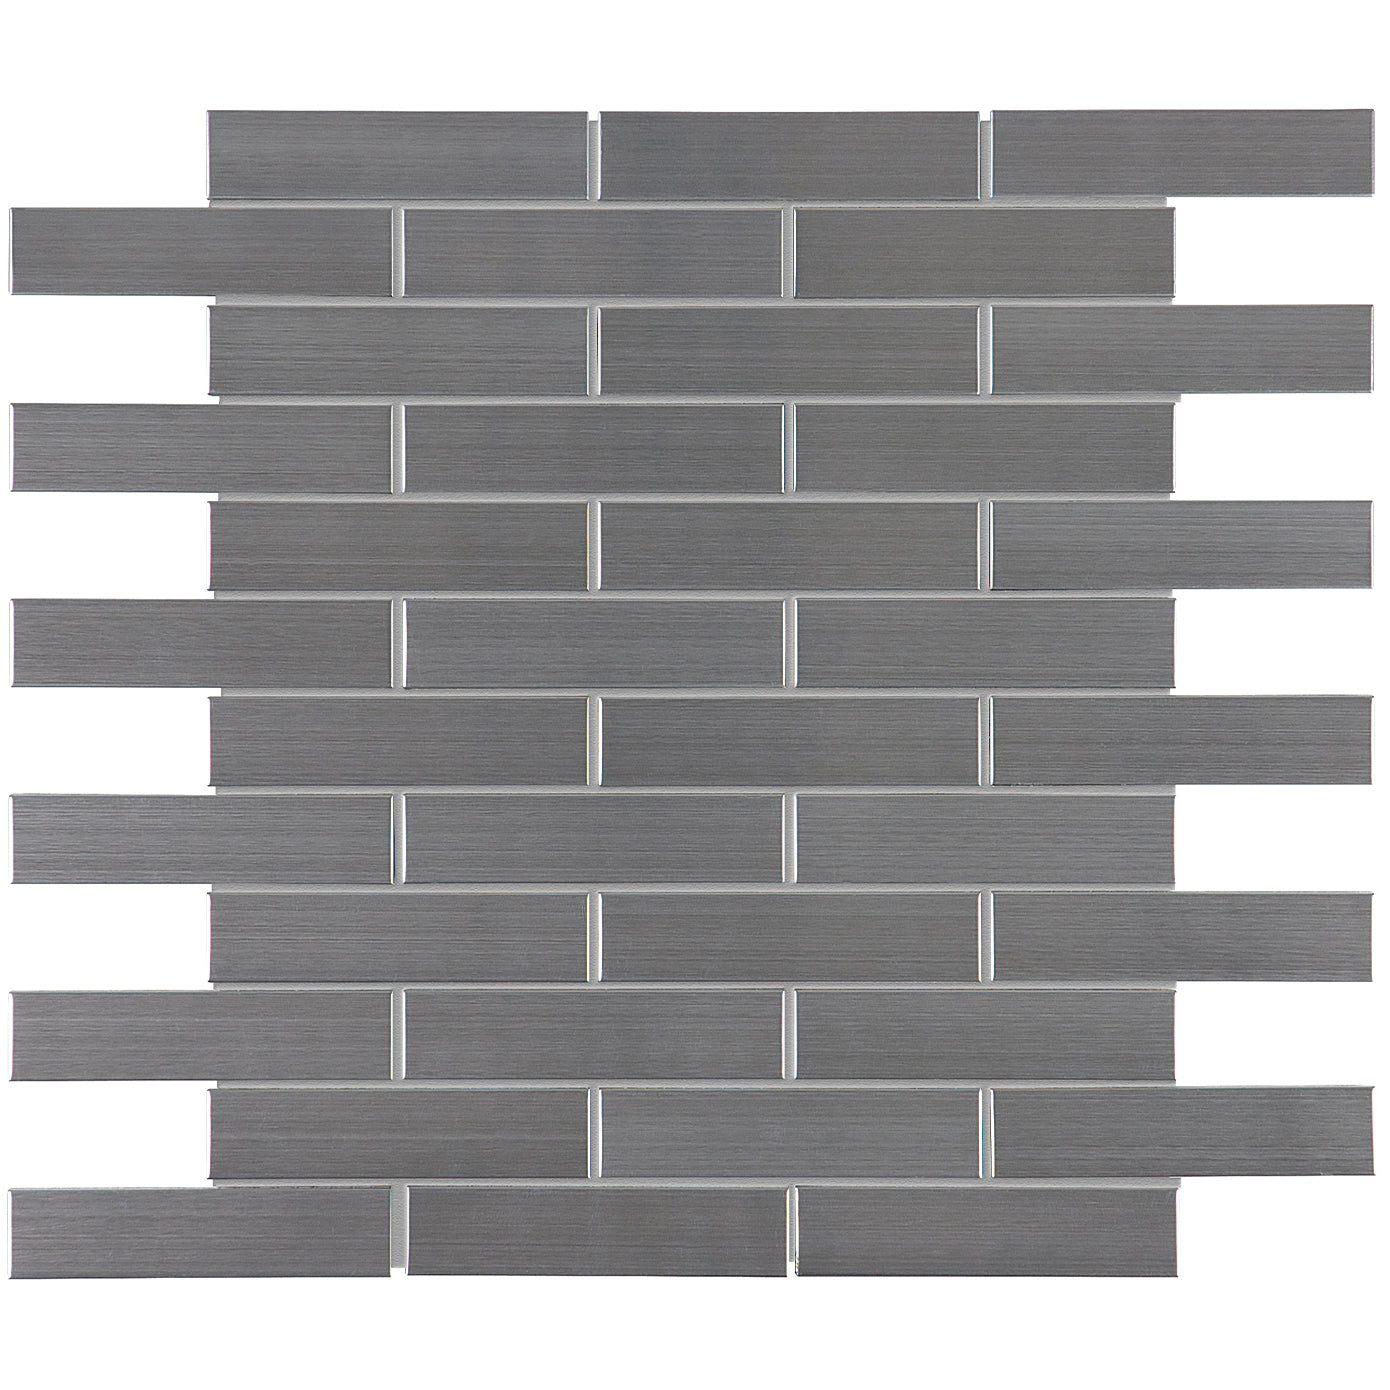 4 x 4 Stainless Steel Tile - Stainless Steel Tile